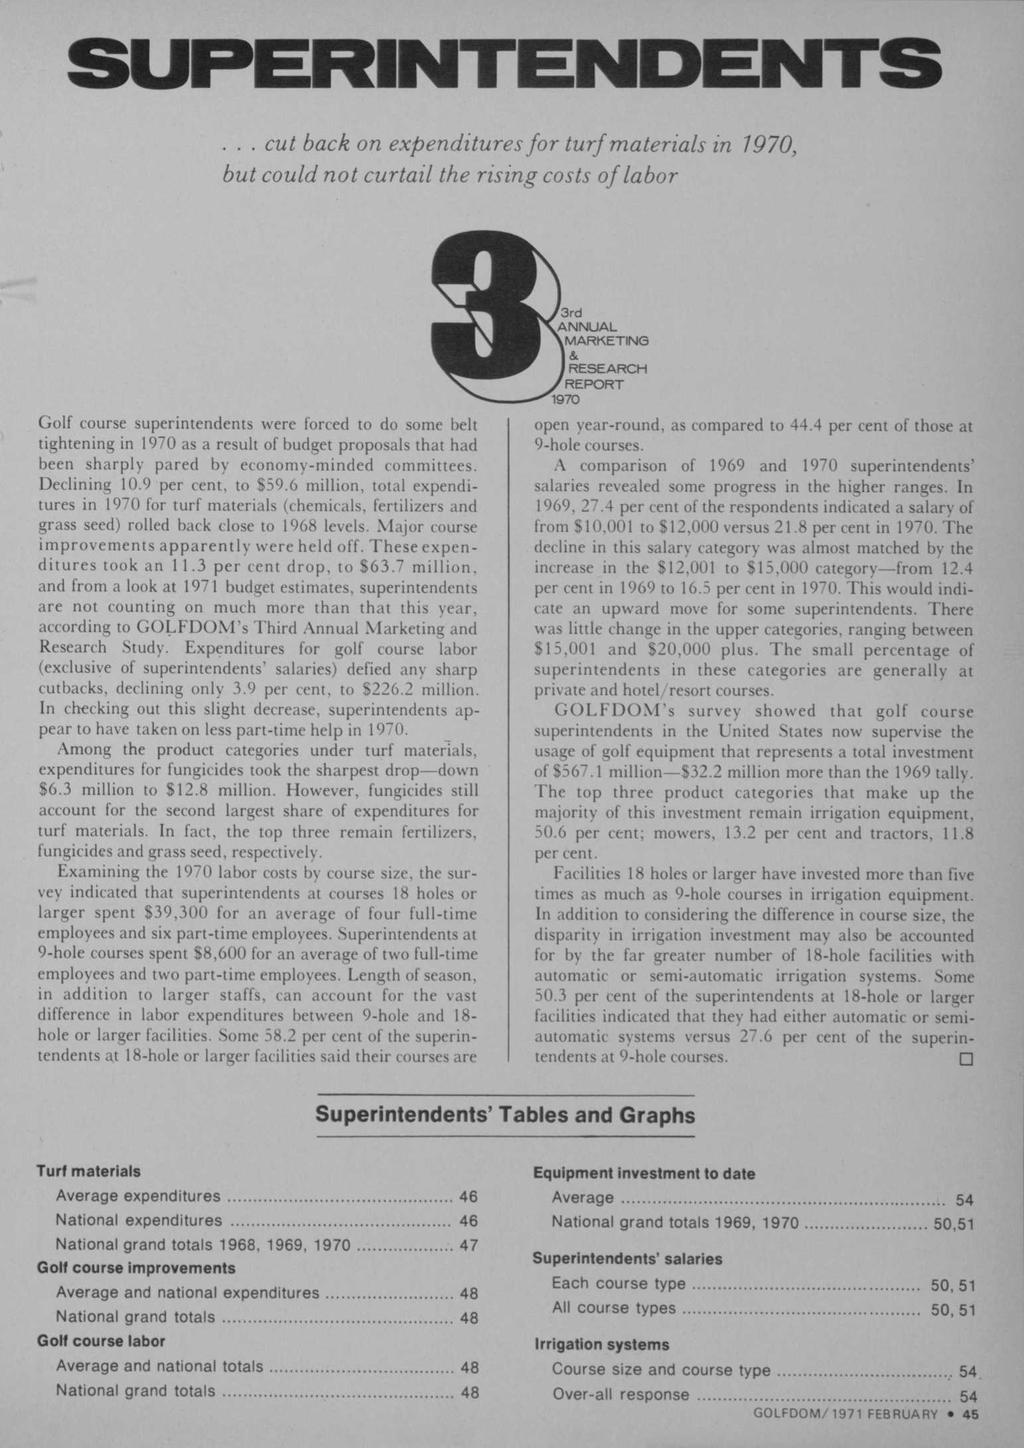 ... cut back on expenditures for turf materials in 1970, but could not curtail the rising costs of labor 3rd ANNUAL MARKETING RESEARCH REPORT 1970 Golf course superintendents were forced to do some